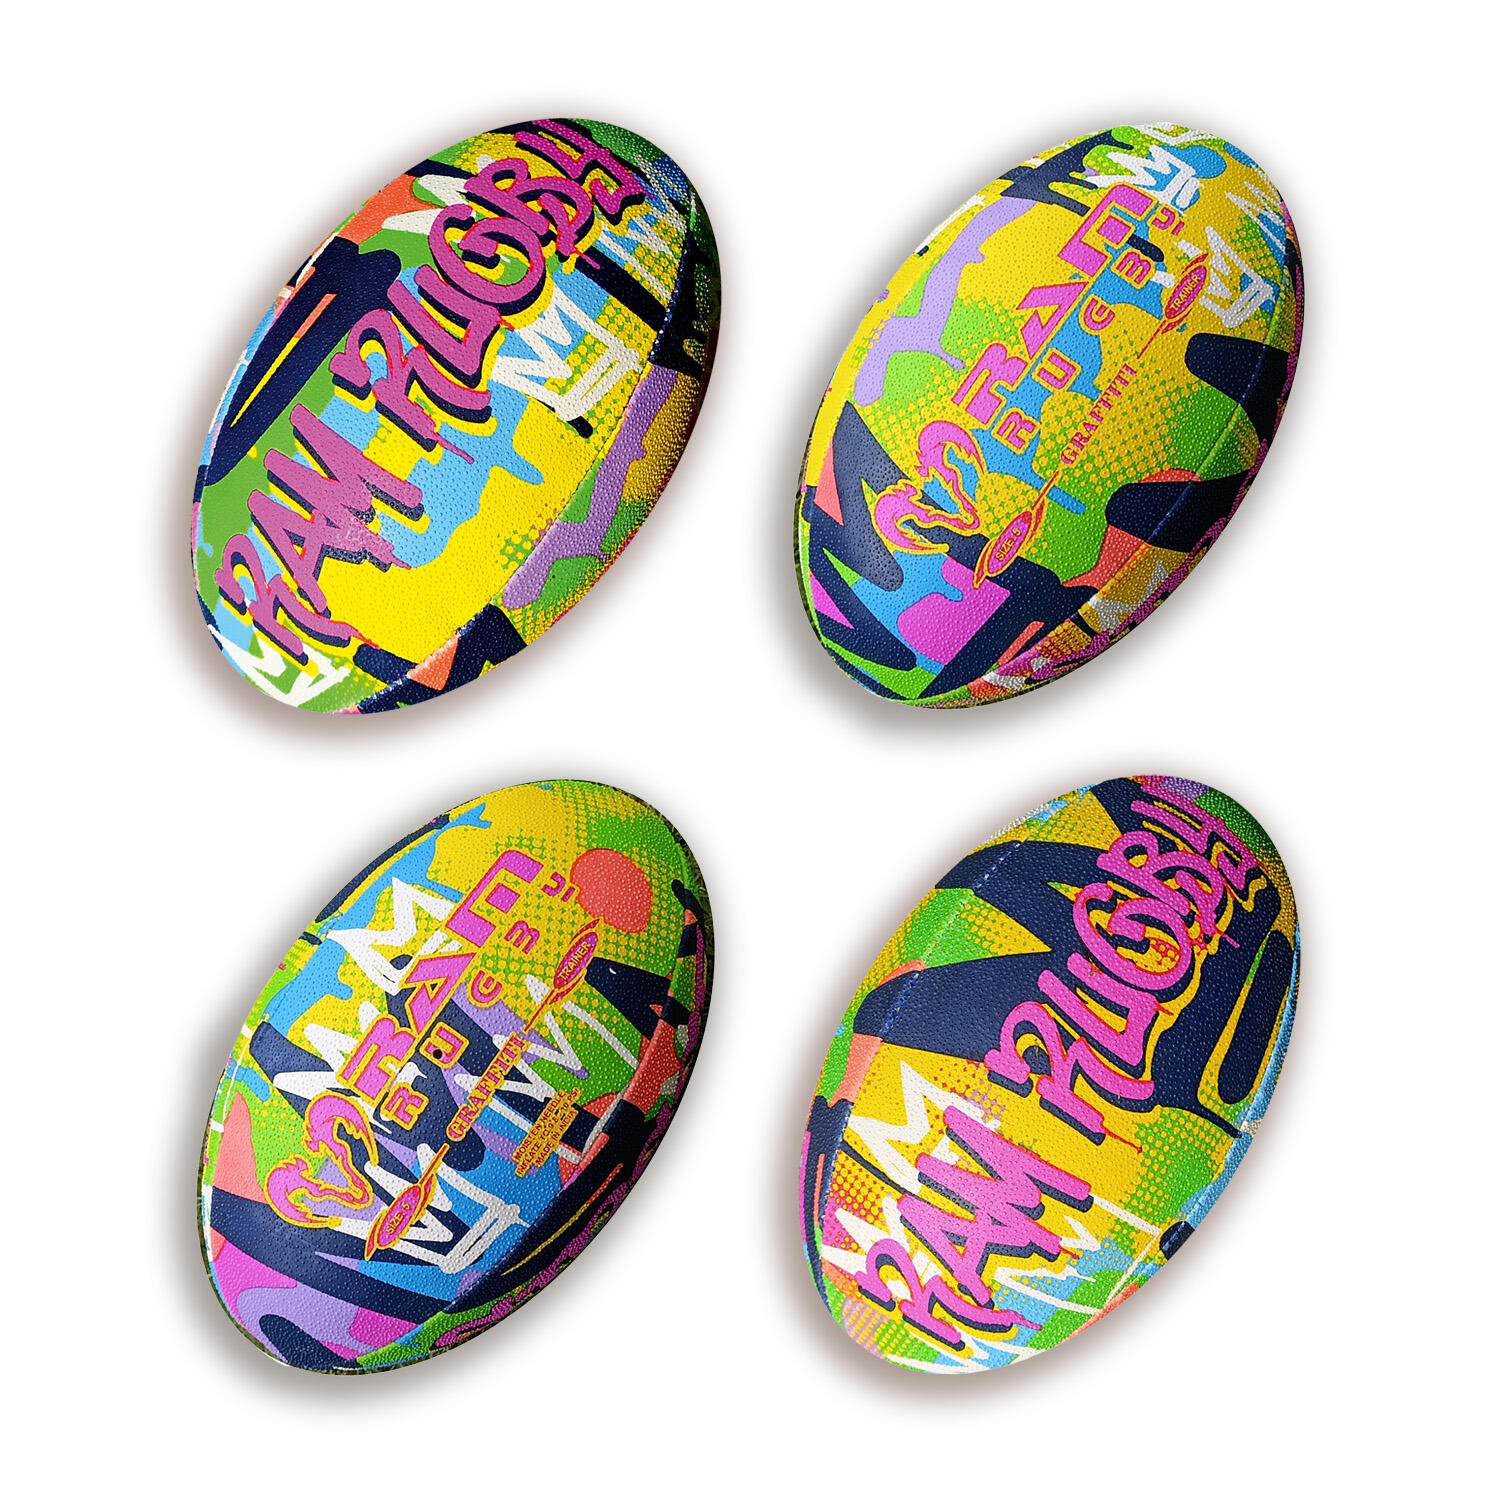 Ram Rugby Ball - Squad - Trainer - (Size 4) - Graffiti 2/2